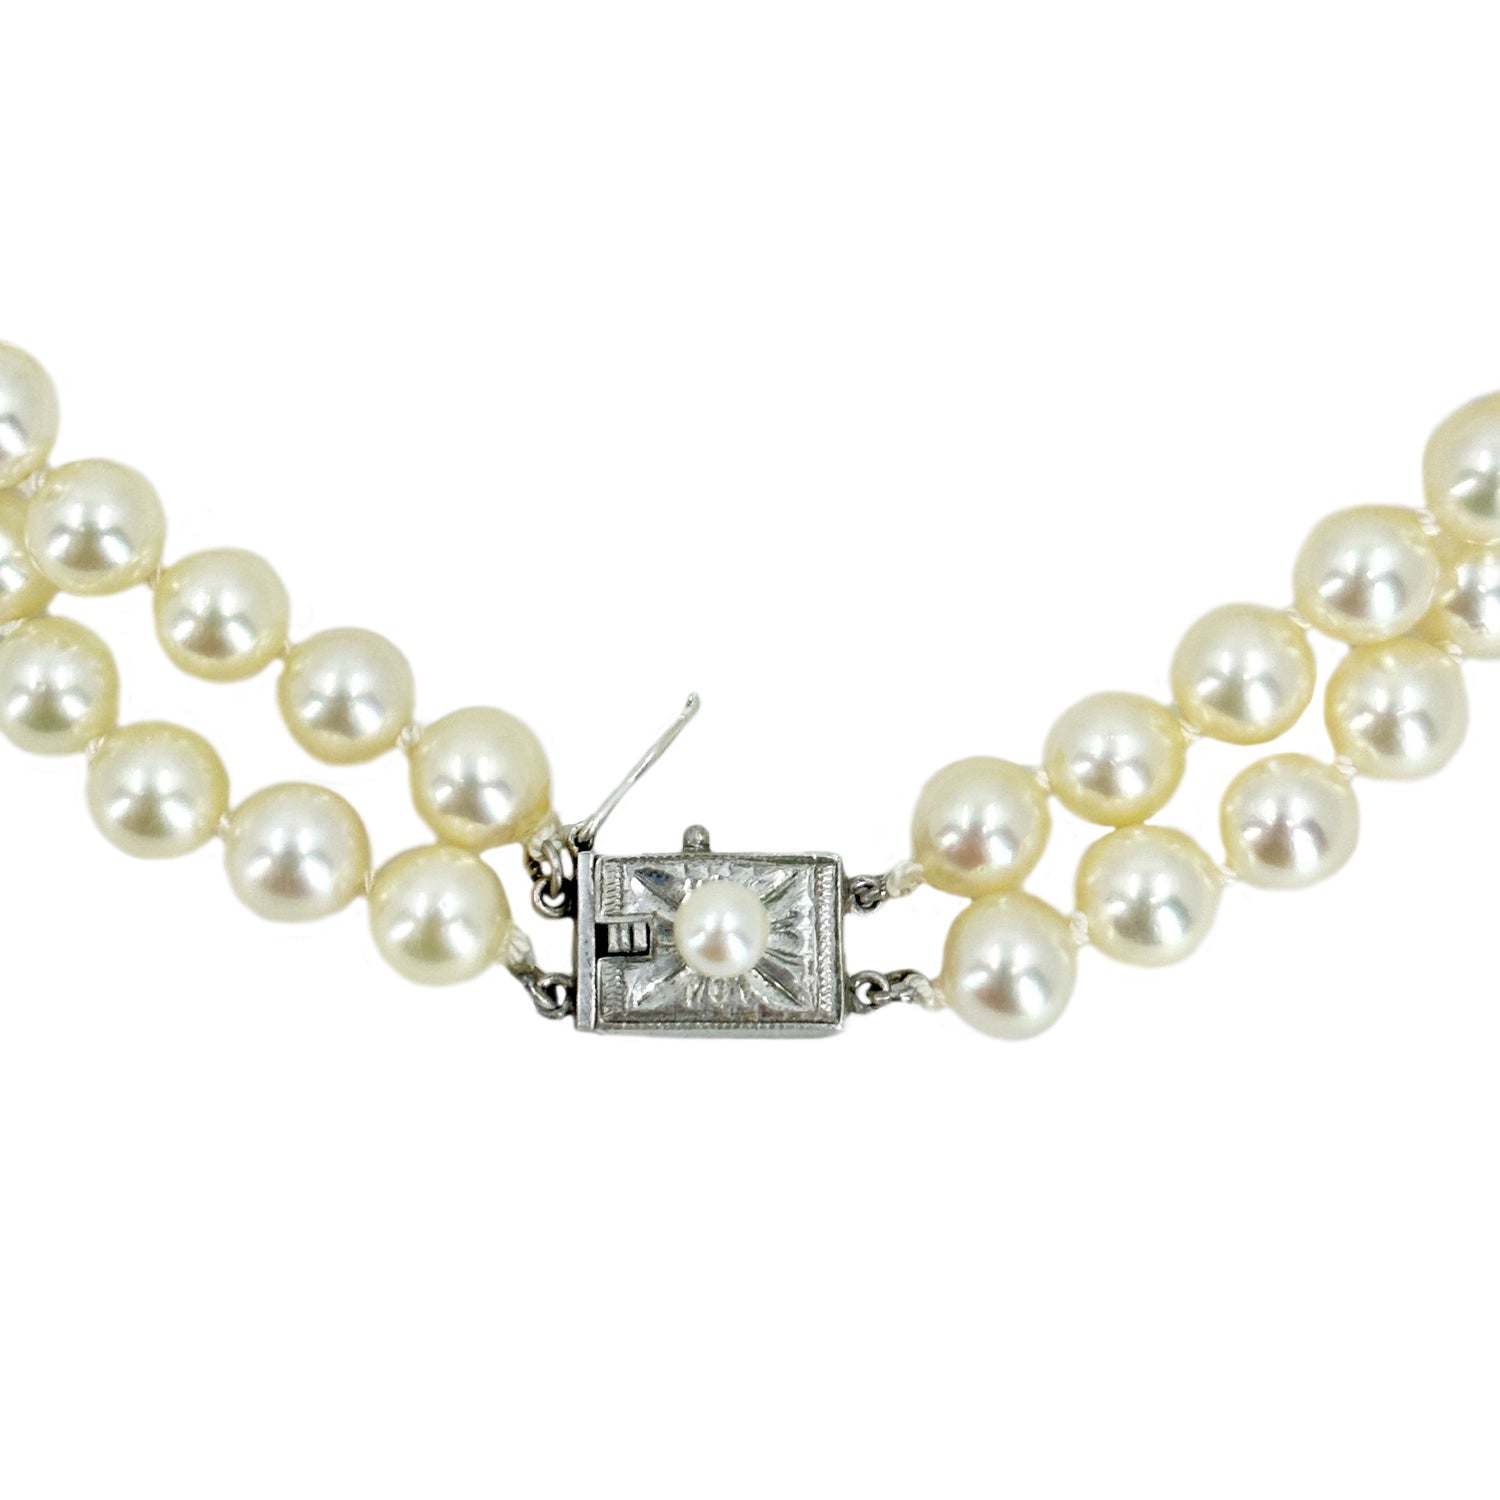 Vintage Double Strand High Quality Japanese Saltwater Akoya Cultured Pearl Bracelet- Sterling Silver